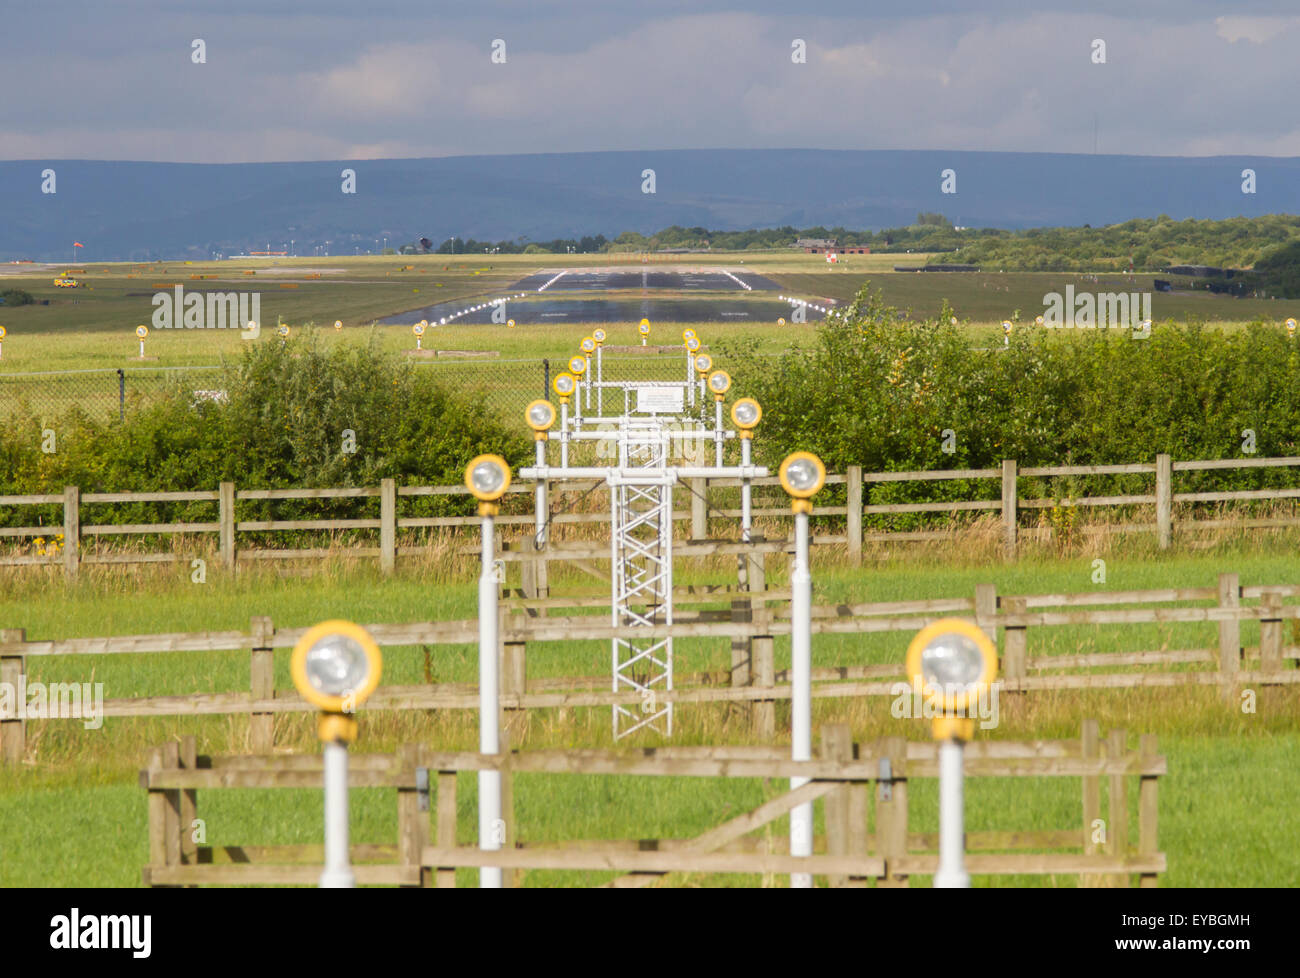 Looking down the runway at Manchester Airport. Top of image shows heat haze. Stock Photo